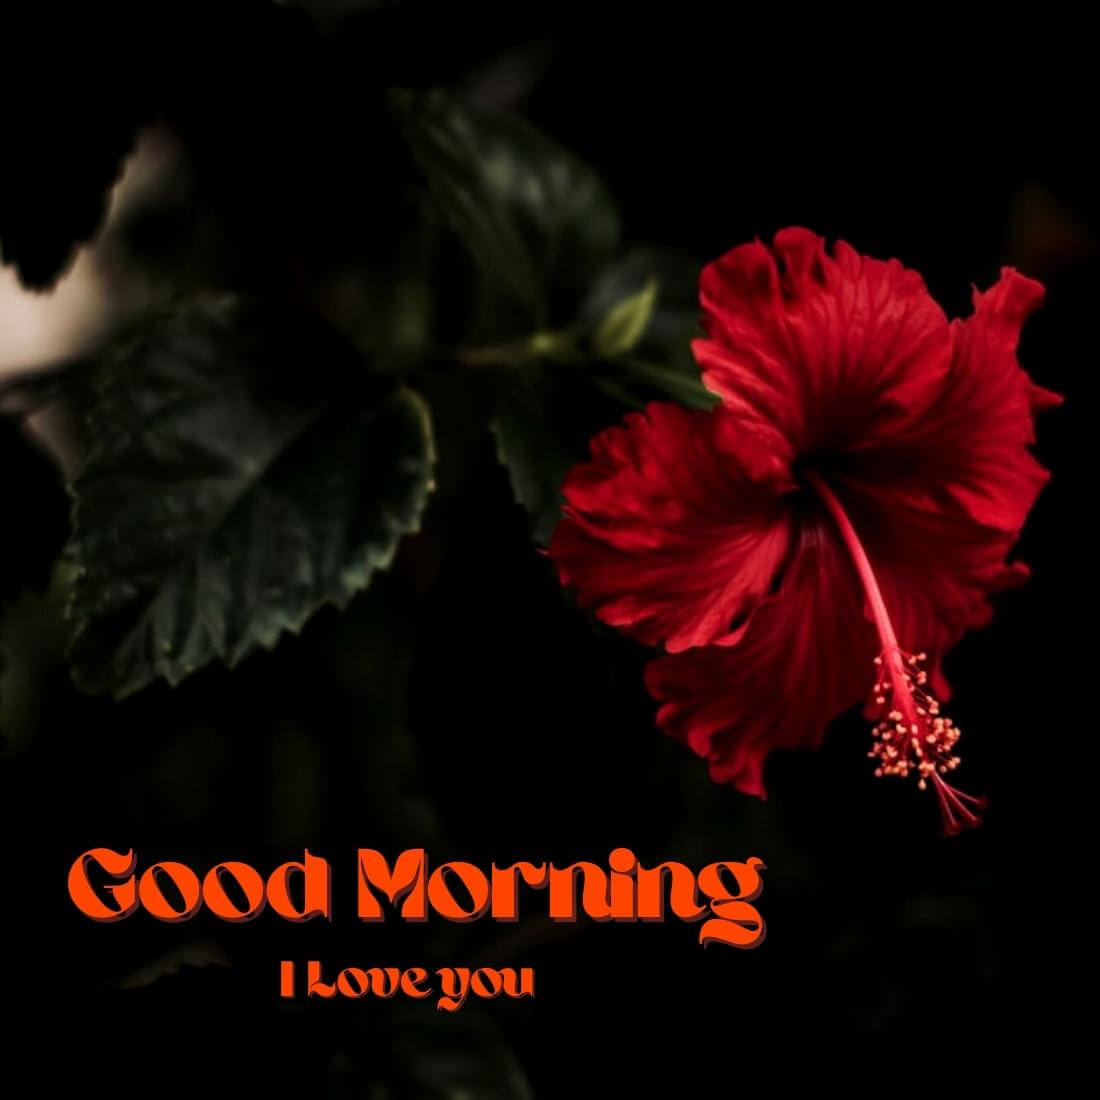 Good Morning I Love You Wallpaper With Re d Flower